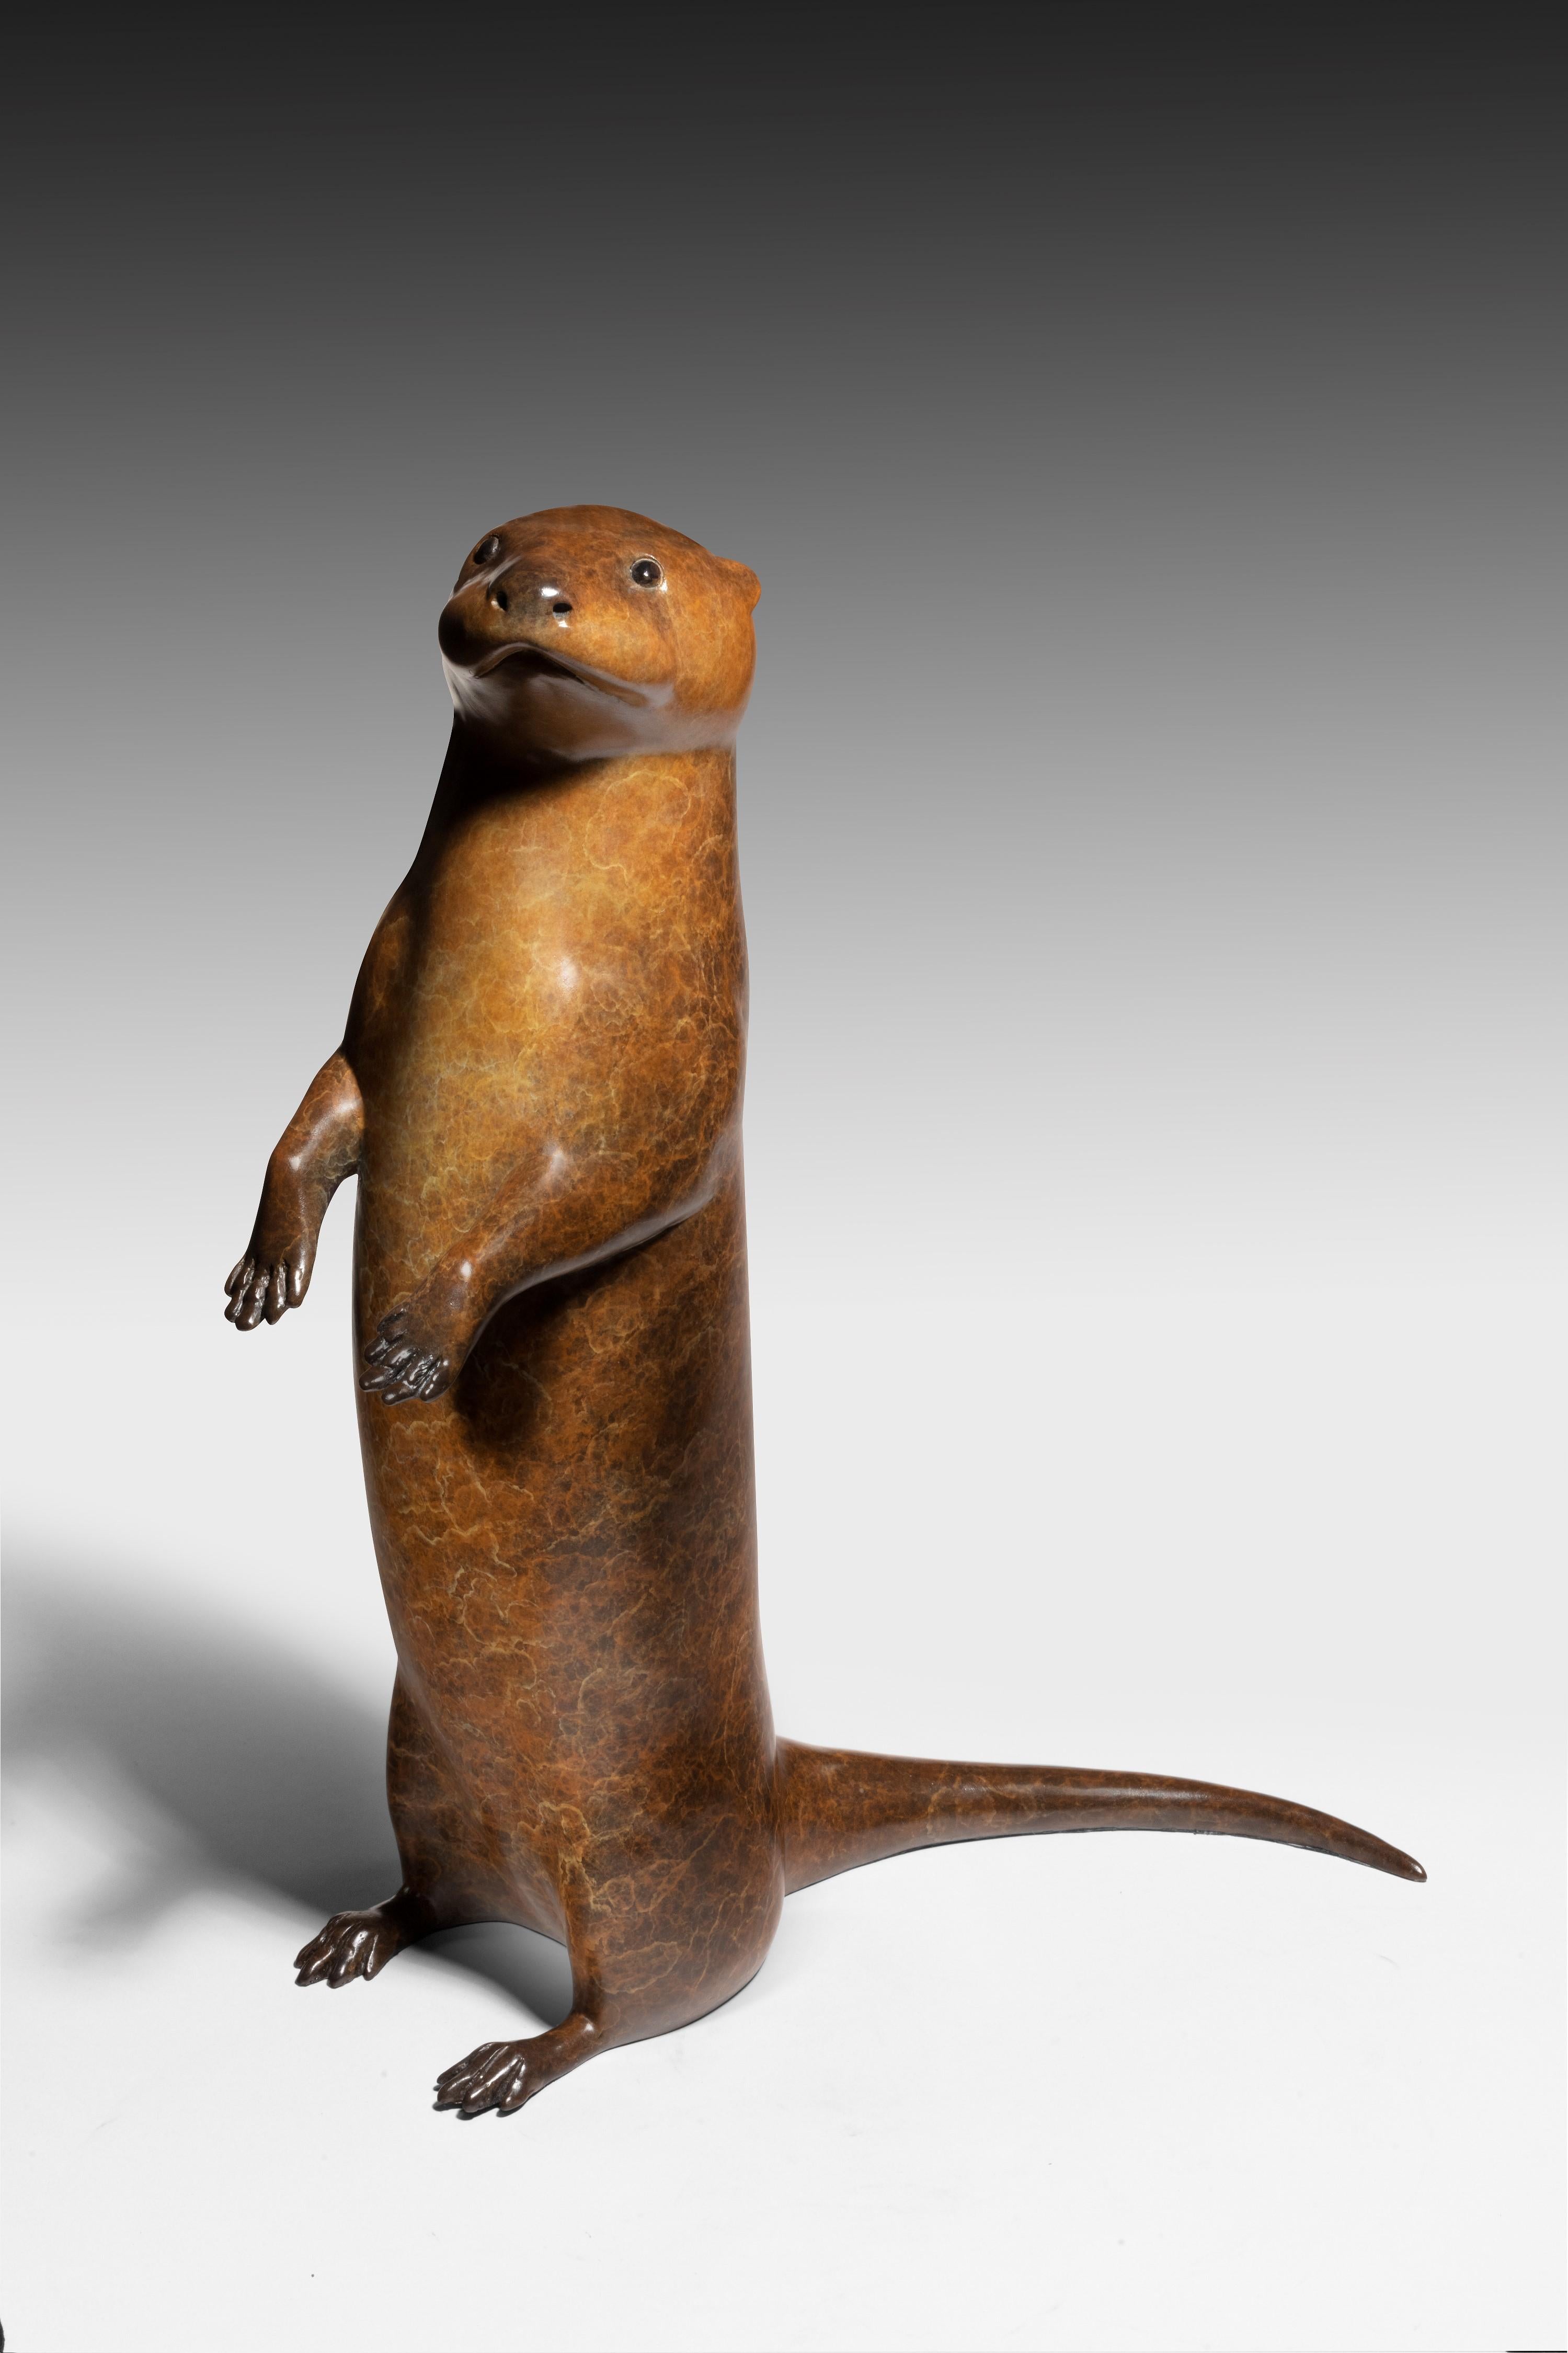 'Otter Pup' is a darling little Bronze sculpture. Richard Smith conveys so much character in such simple lines, exemplifying a truly wonderful talent - you can't help but want to tickle this little guy's tummy! The fantastic richly detailed